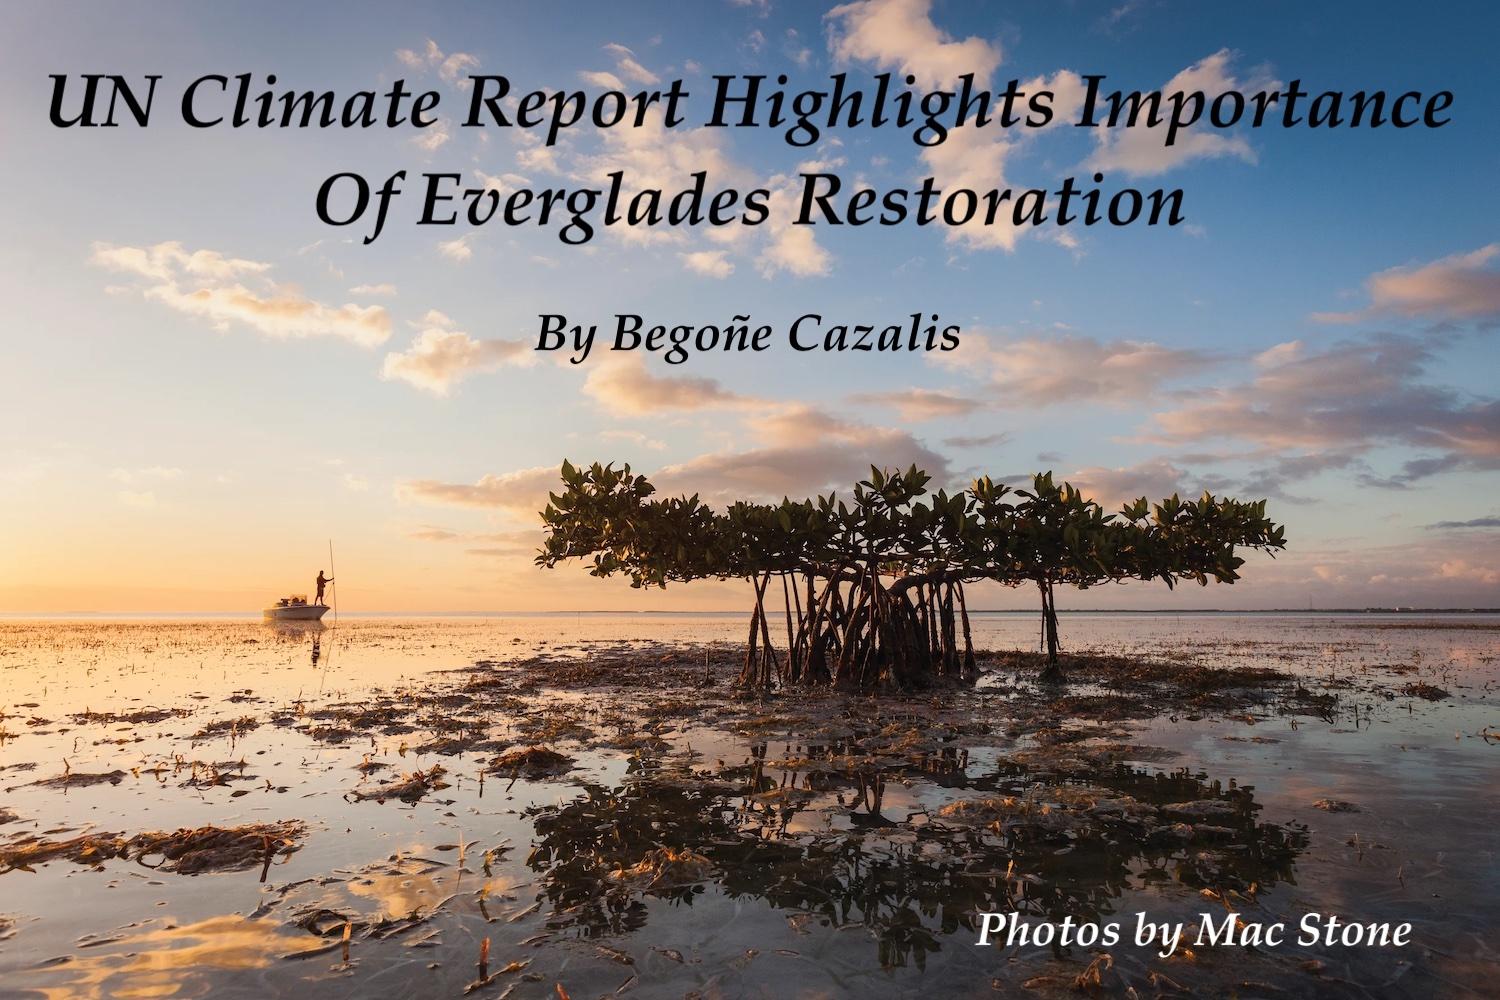 UN Climate Report Highlights Importance of Everglades Restoration